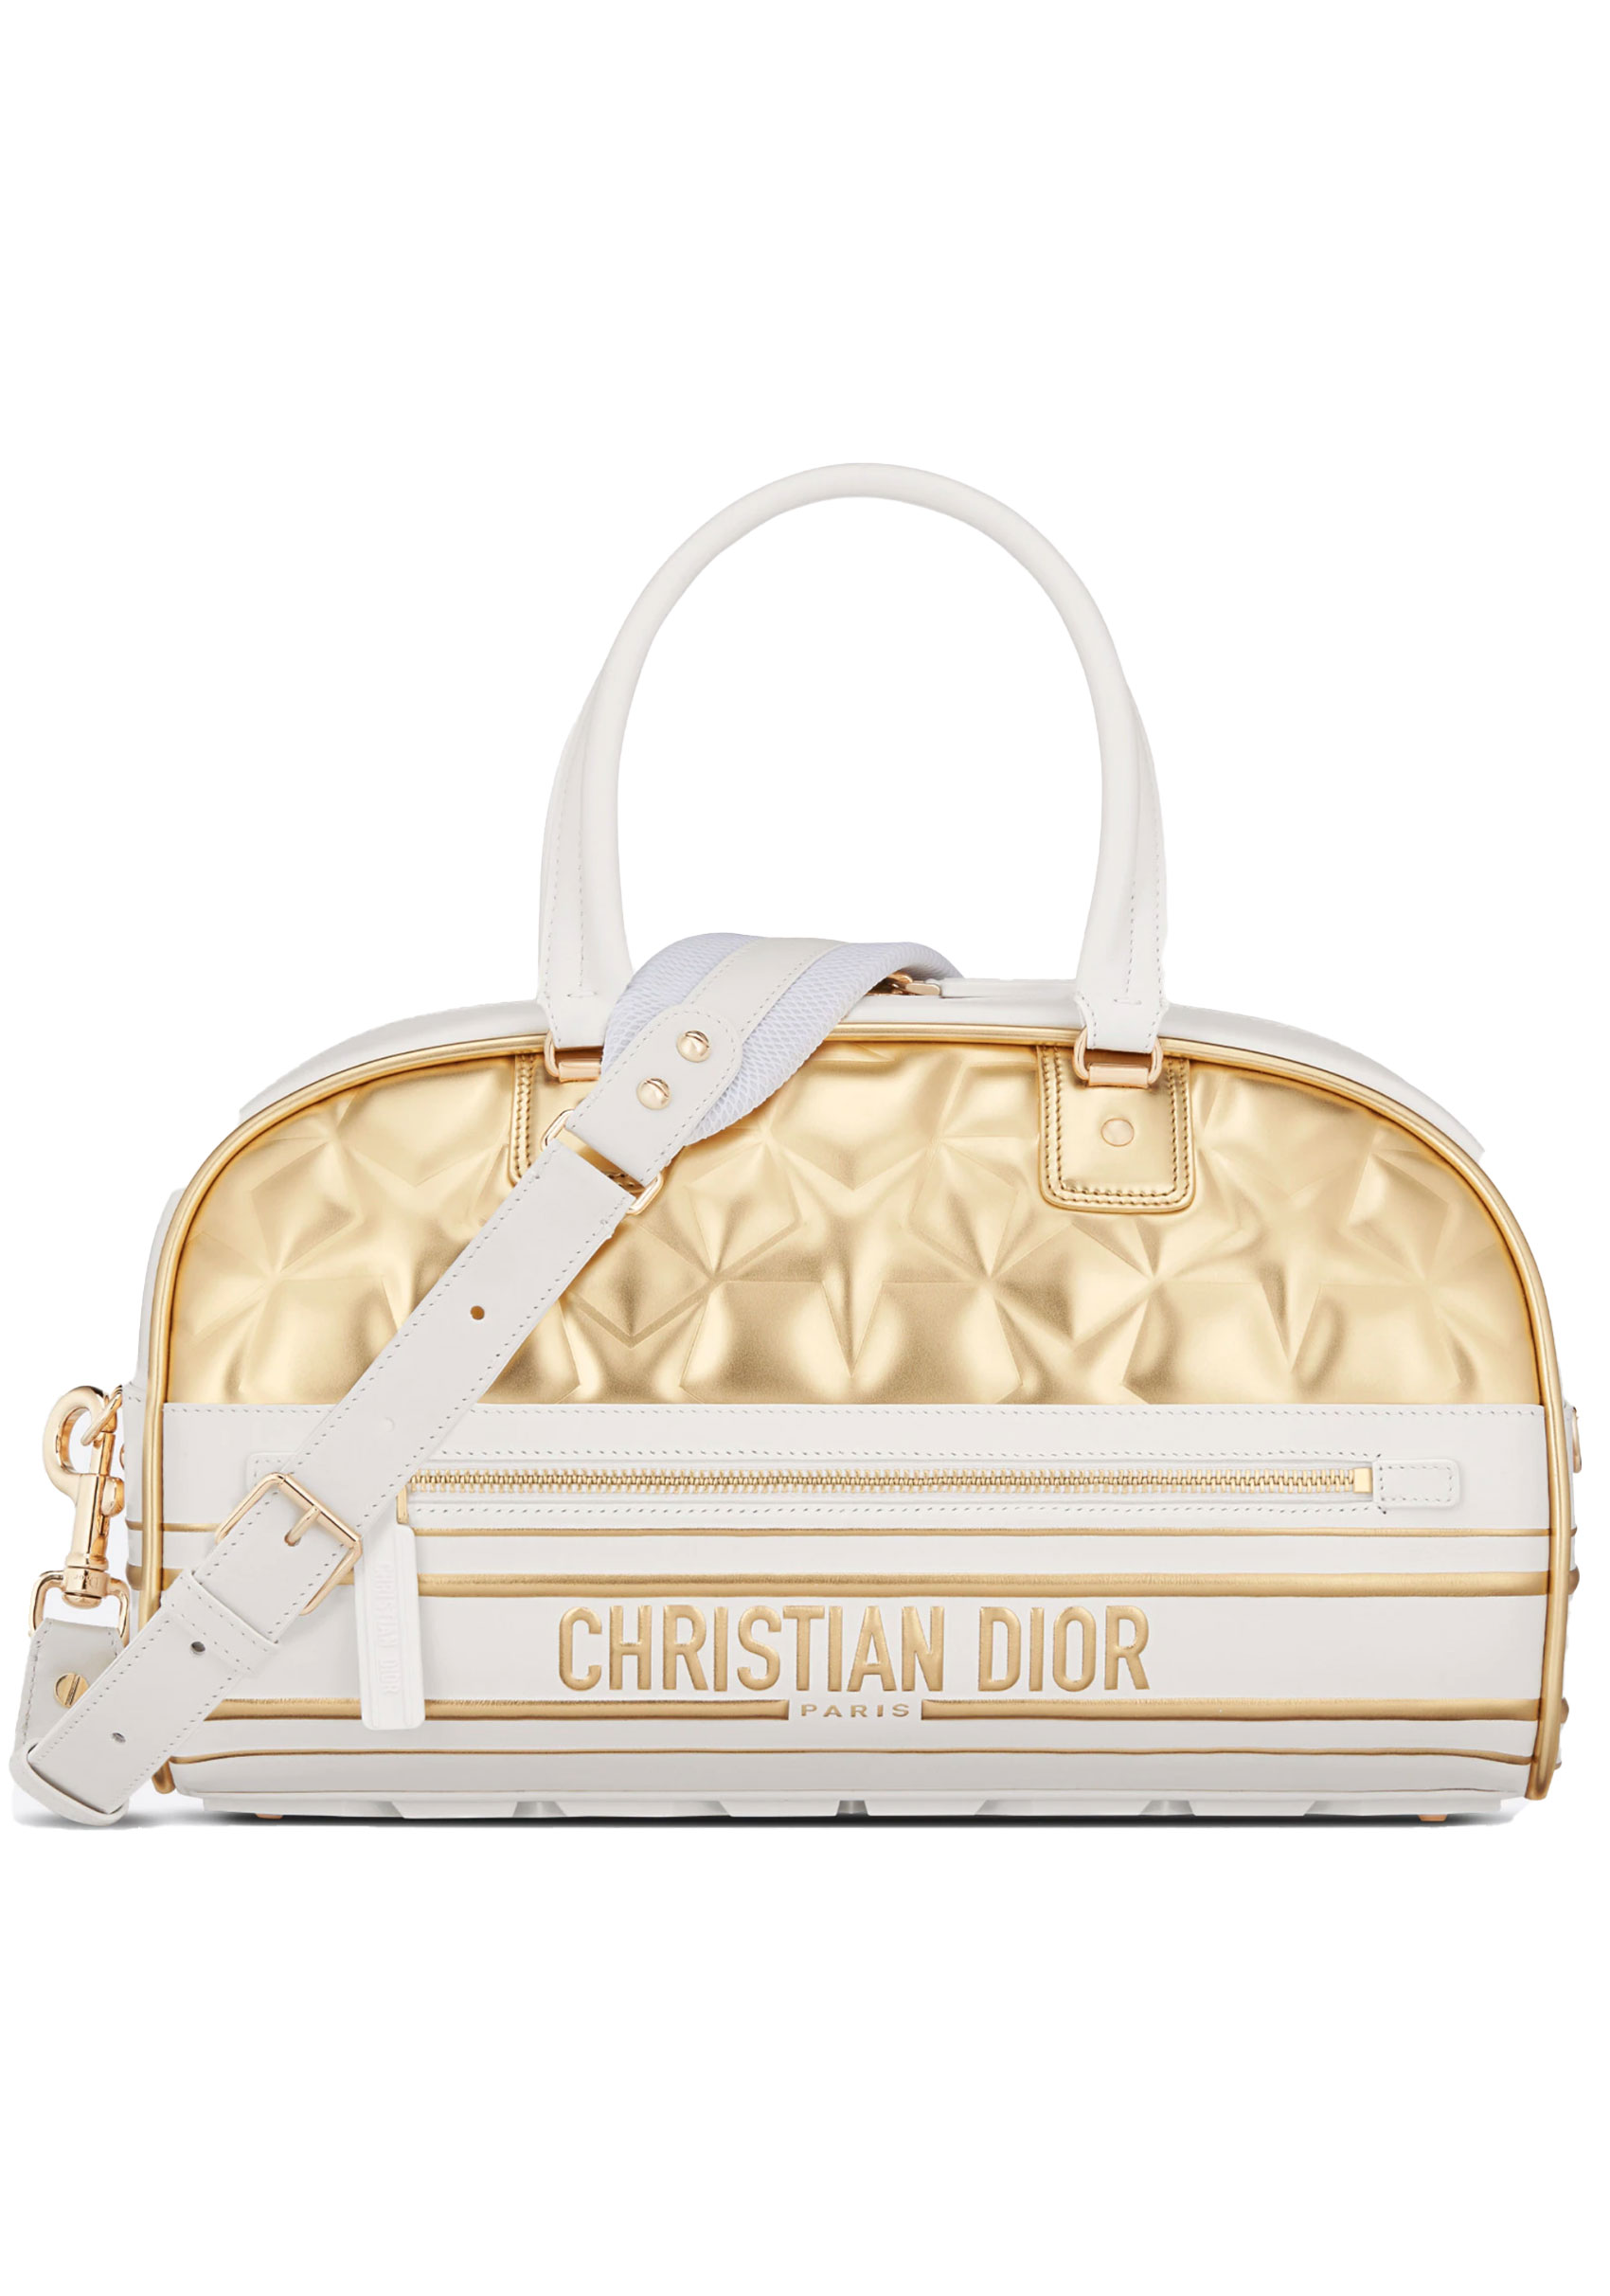 Dior Vibe: All About The Hottest 2022 Dior Bag Release » coco bassey